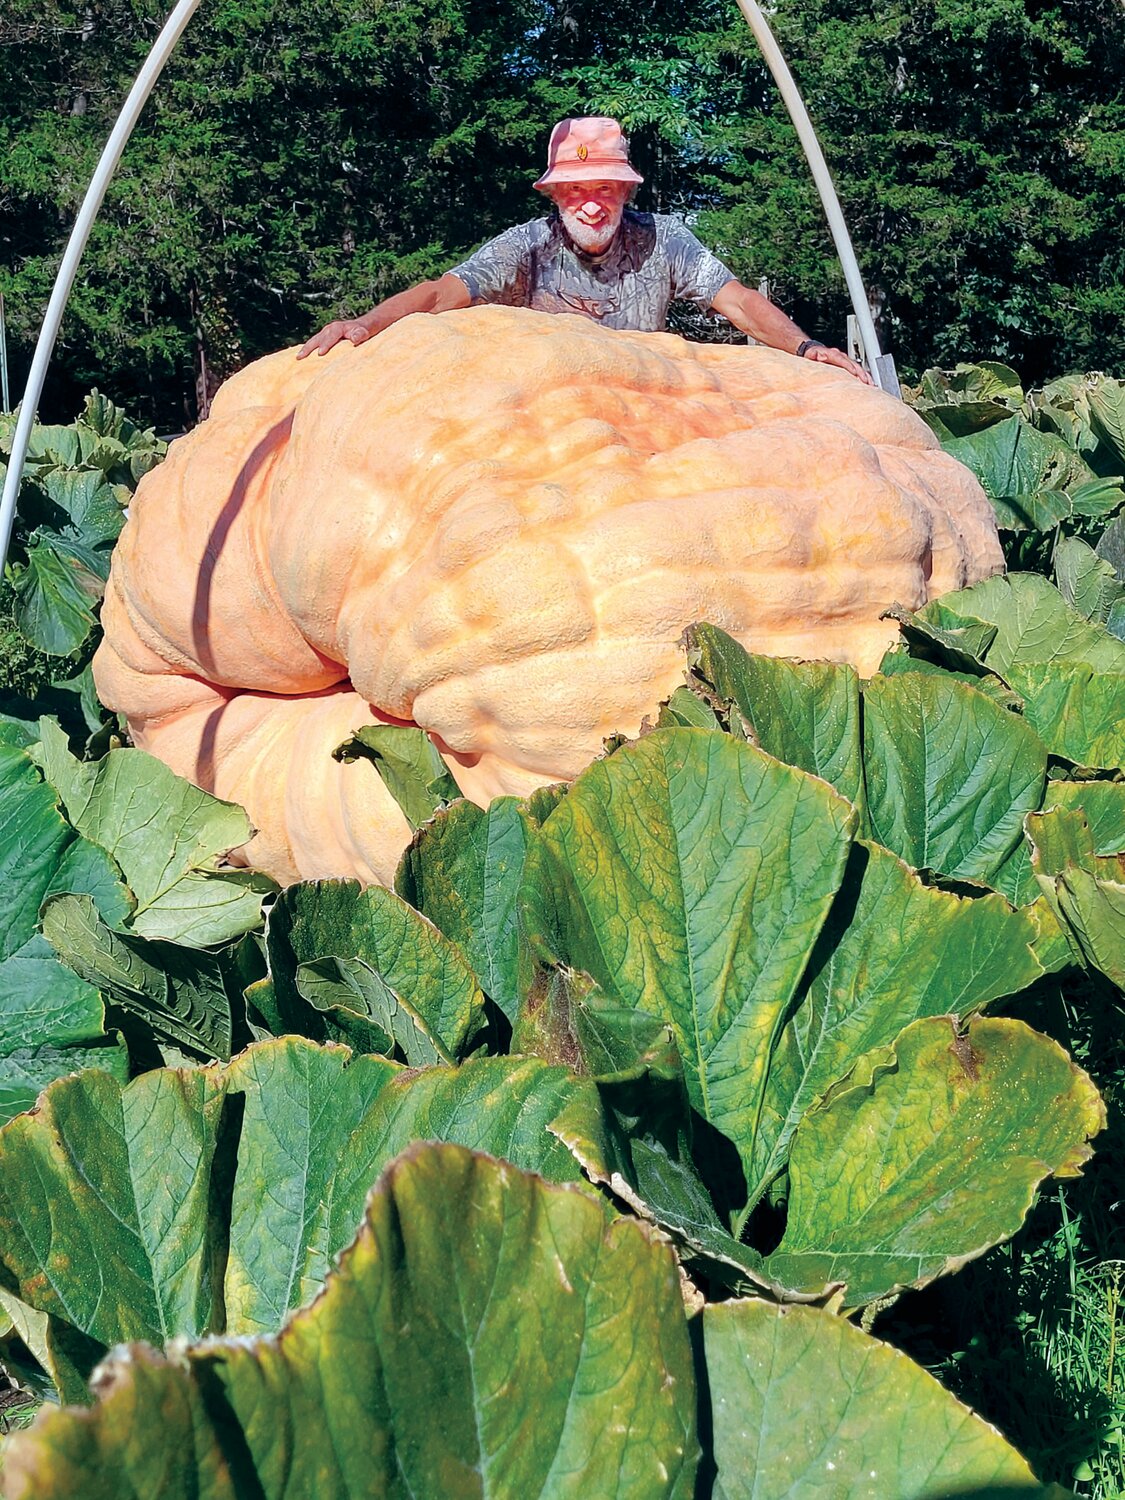 IDITAROD OF GARDENING: Steve Sperry shows off his final harvest of the year, soon to be known as the Sperry XXXX (the X’s will be replaced by the pumpkin’s weight, after this weekend’s Rhode Island state weigh-in). The gargantuan gourd is estimated to weigh well over 2,000 pounds. The giant pumpkin, grown off Hopkins Avenue in Johnston, is the fourth of the season raised by Sperry.